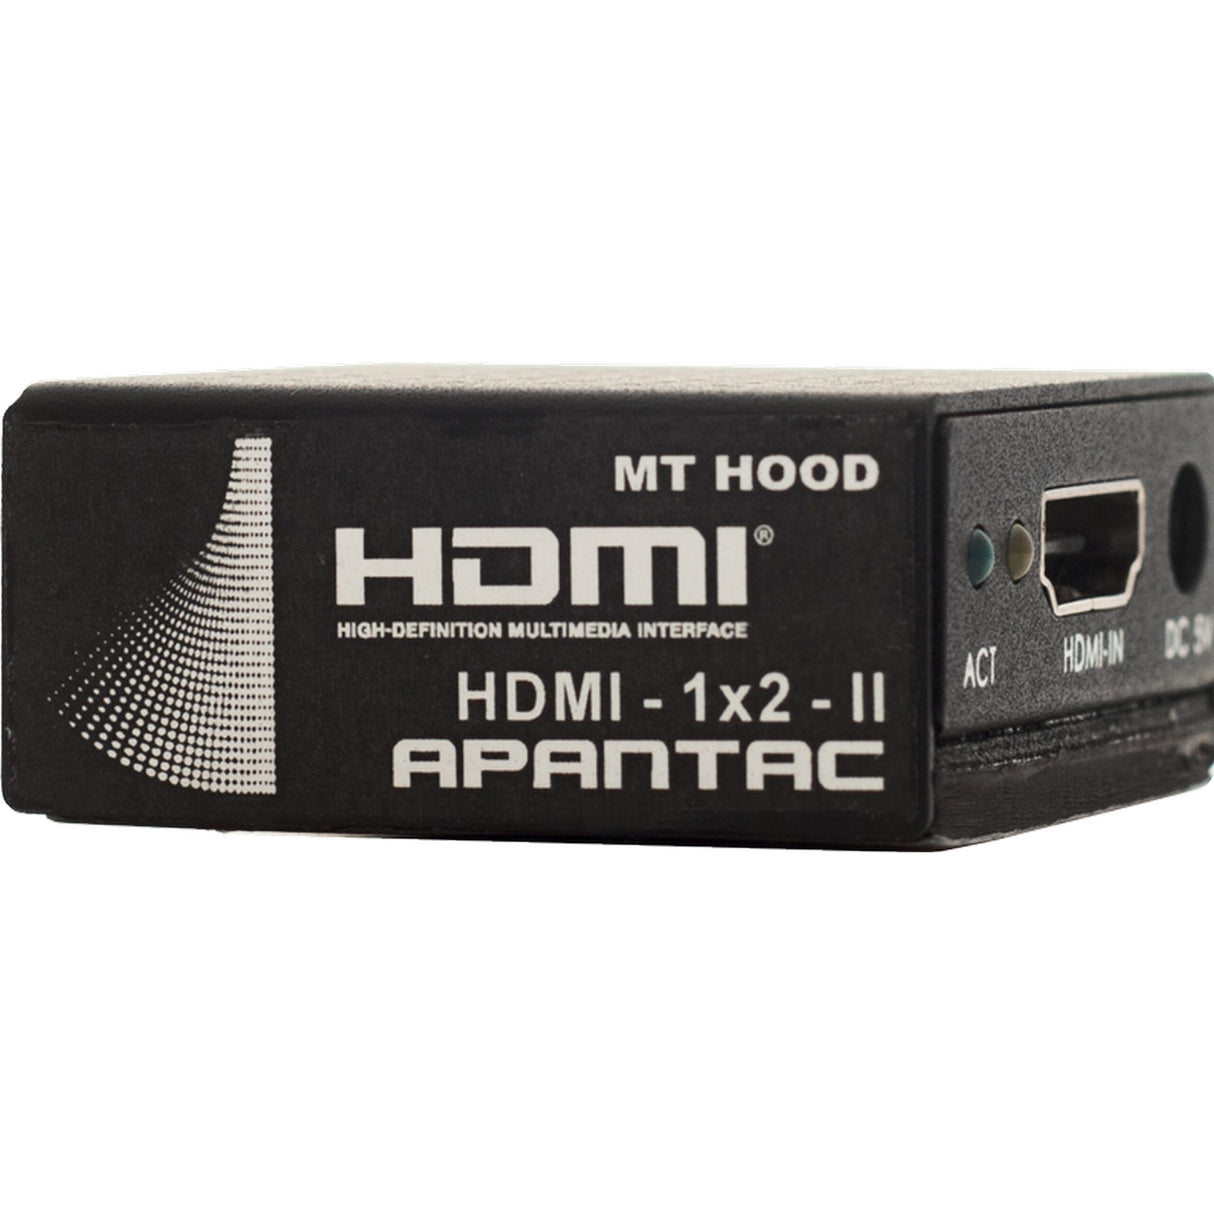 Apantac HDMI-1x2-II 1 to 2 HDMI Splitter with Magnetic Mount